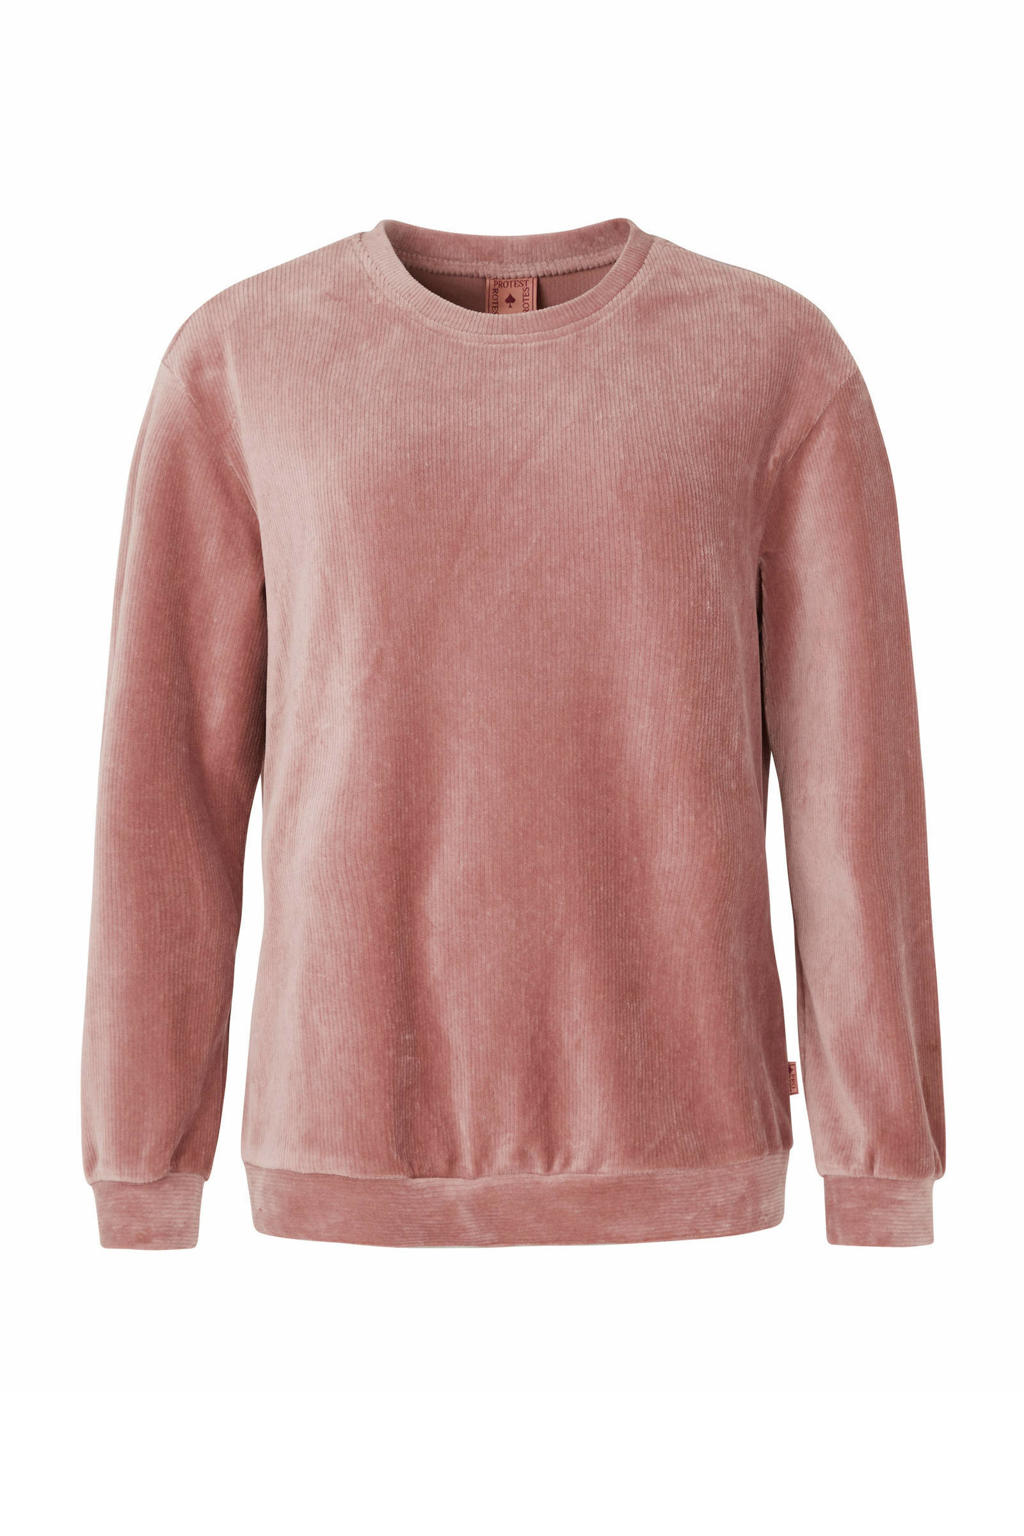 Protest sweater Chyrese roze